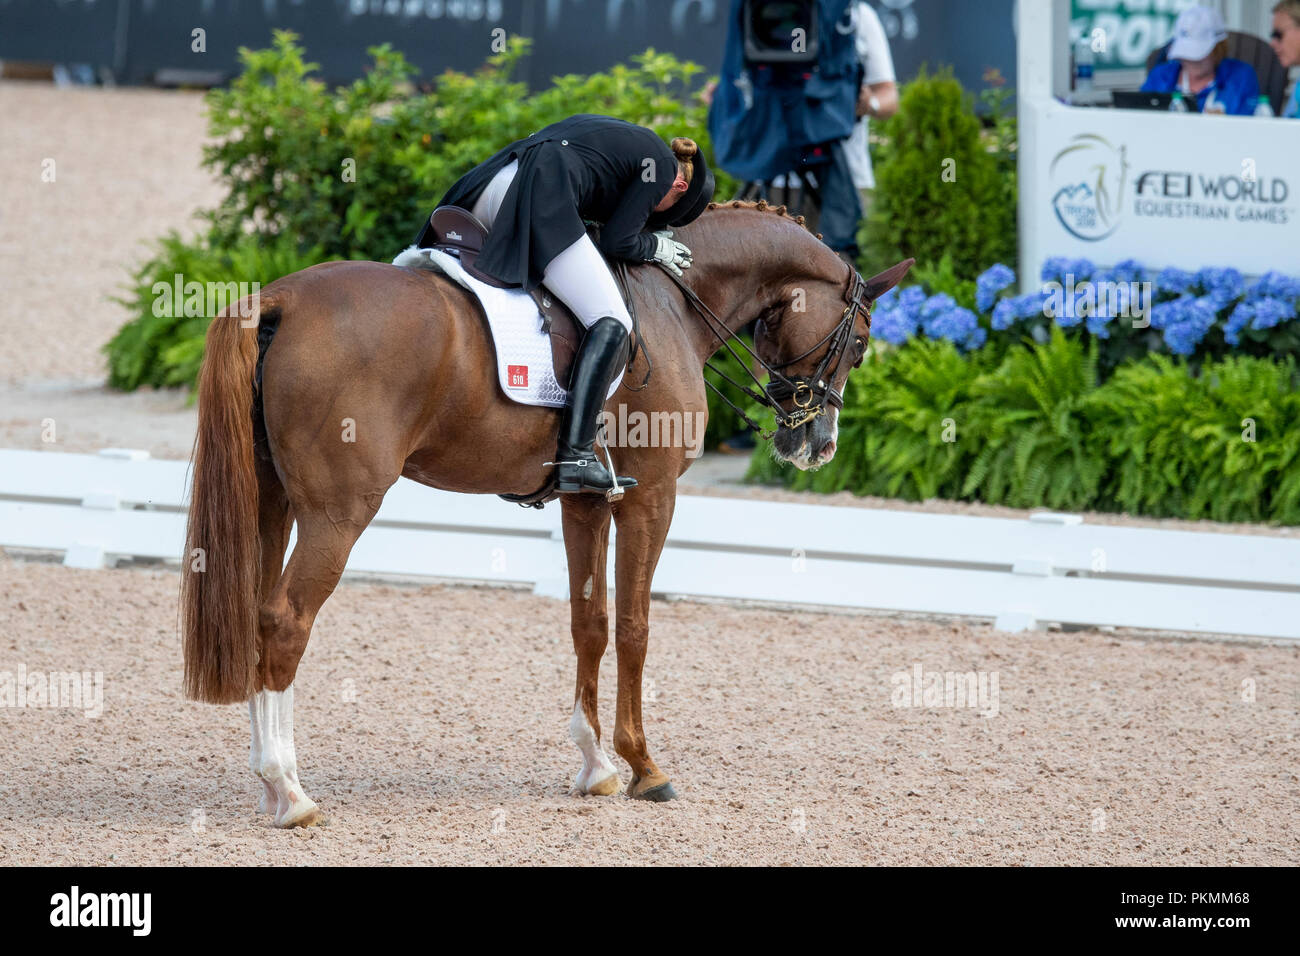 Tryon, USA. 13th Sep, 2018. Equestrian, FEI World Equestrian Game 2018, Grand Prix de Dressage: Isabell Werth cheering while on her horse Bella Rose. Credit: Stefan Lafrentz/dpa/Alamy Live News Stock Photo